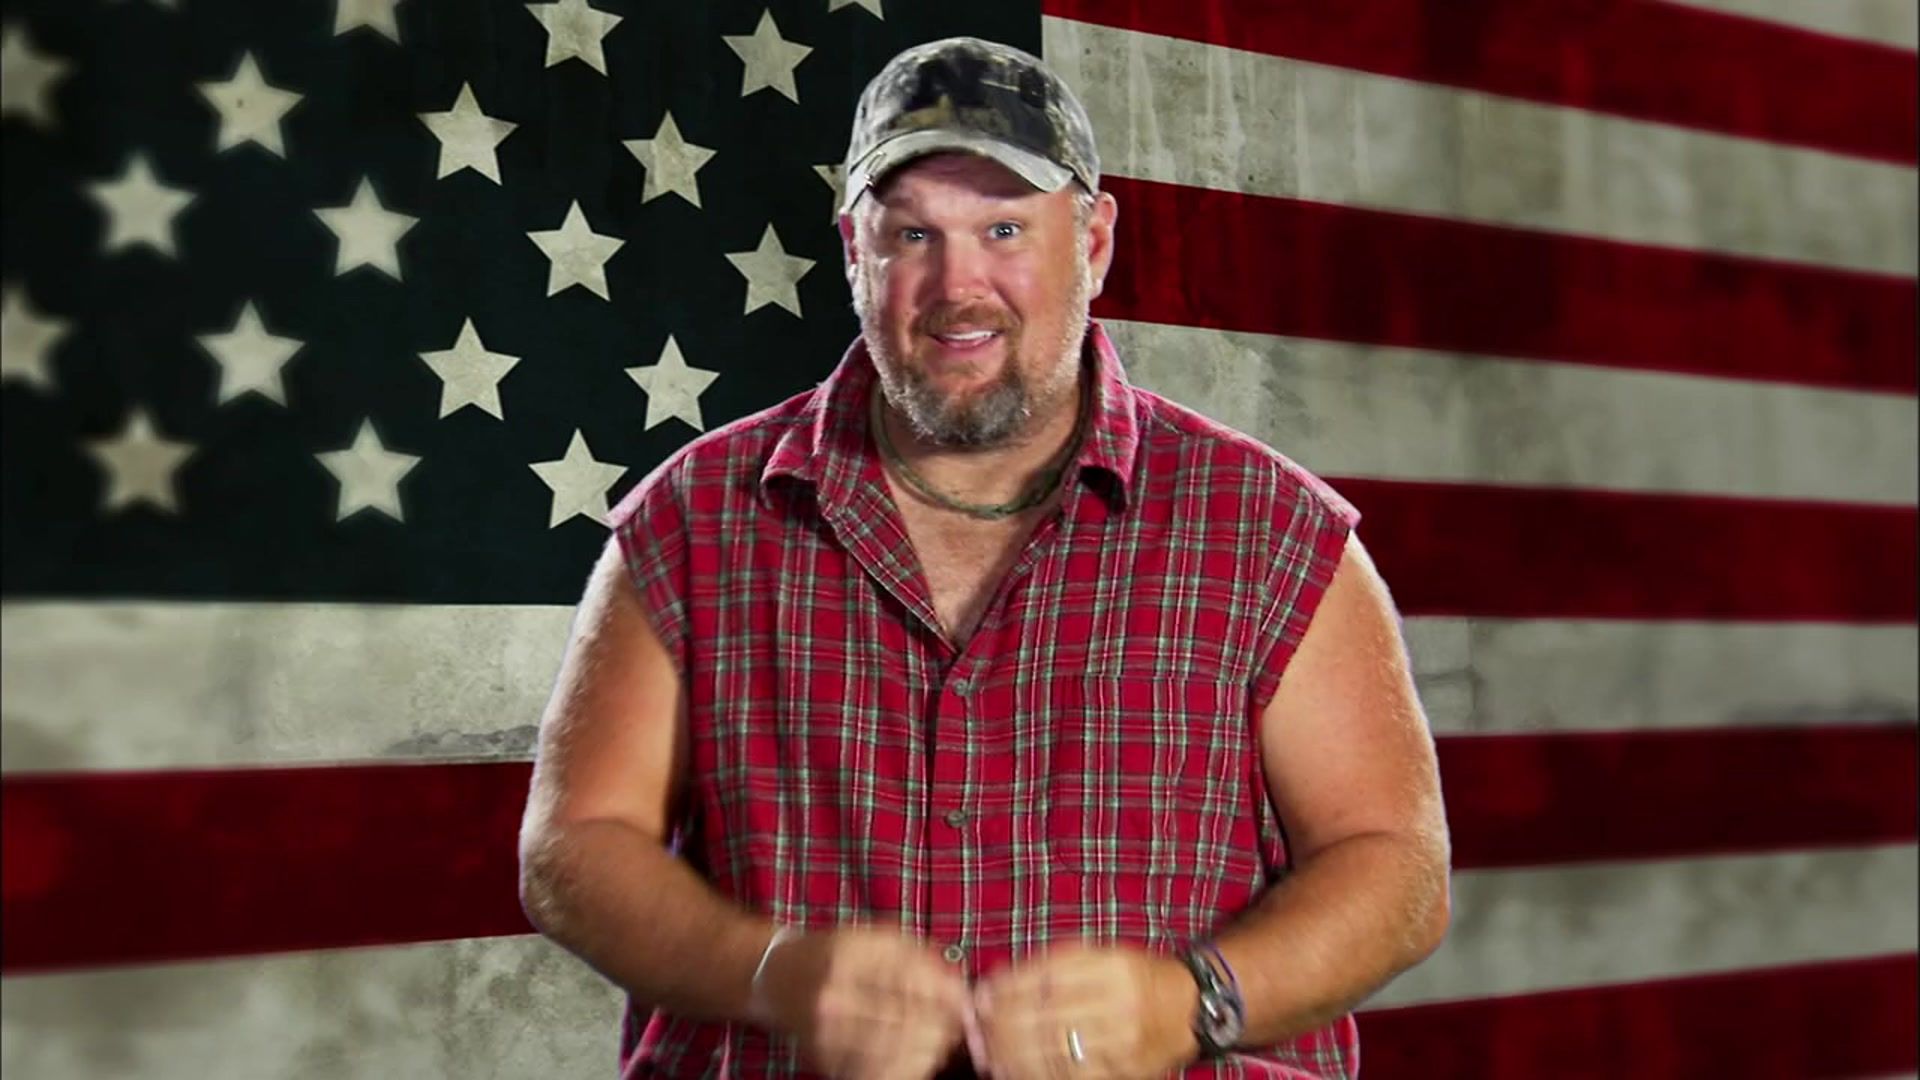 Watch Only in America with Larry the Cable Guy.